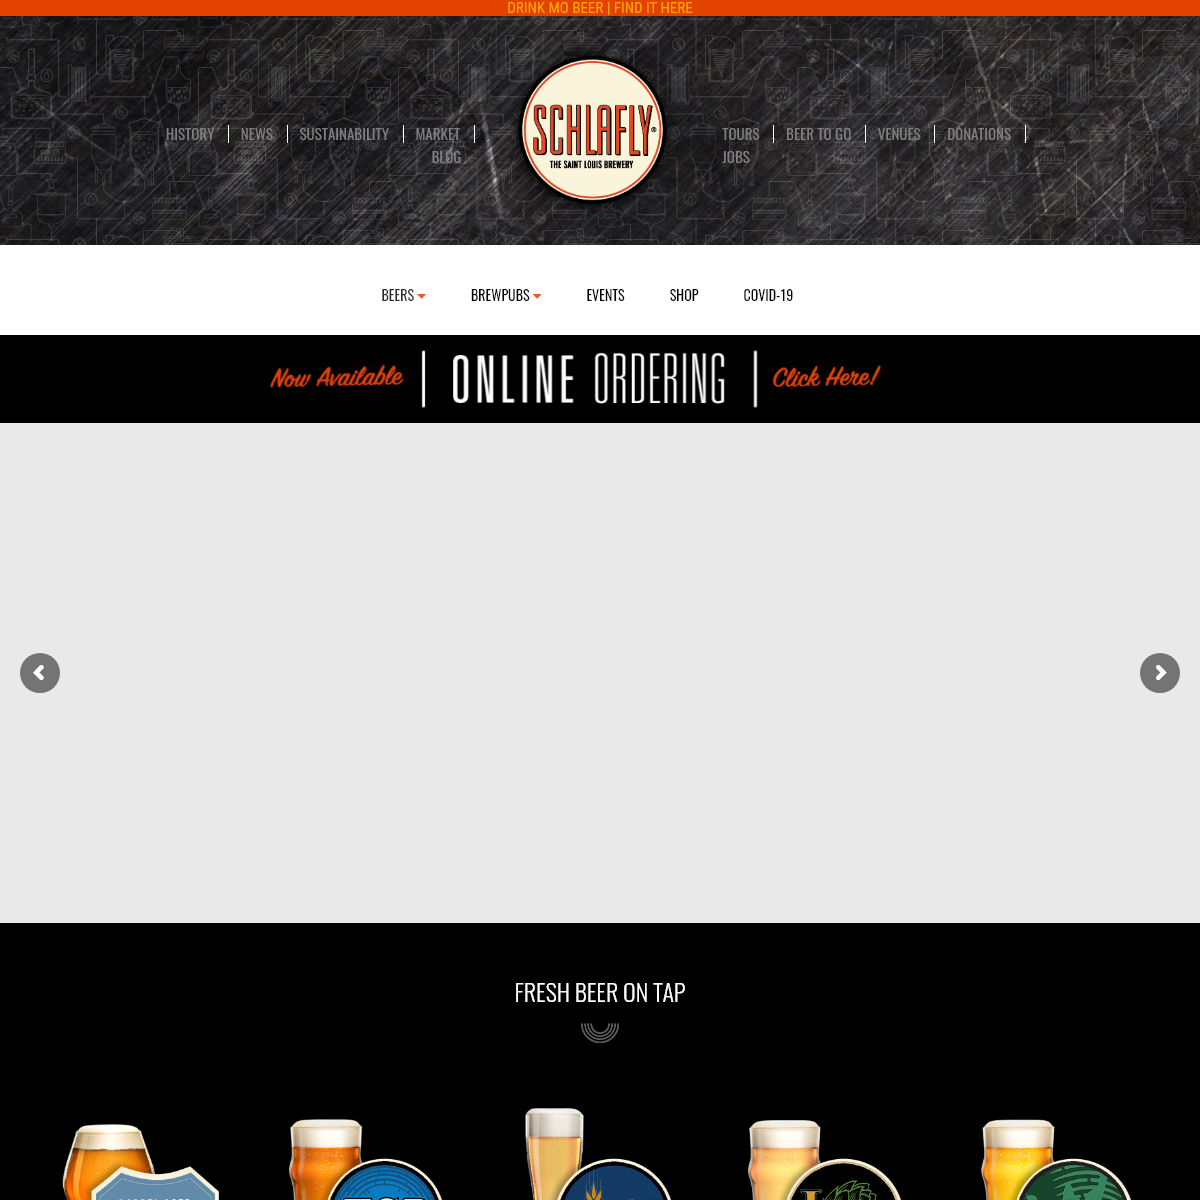 A complete backup of schlafly.com